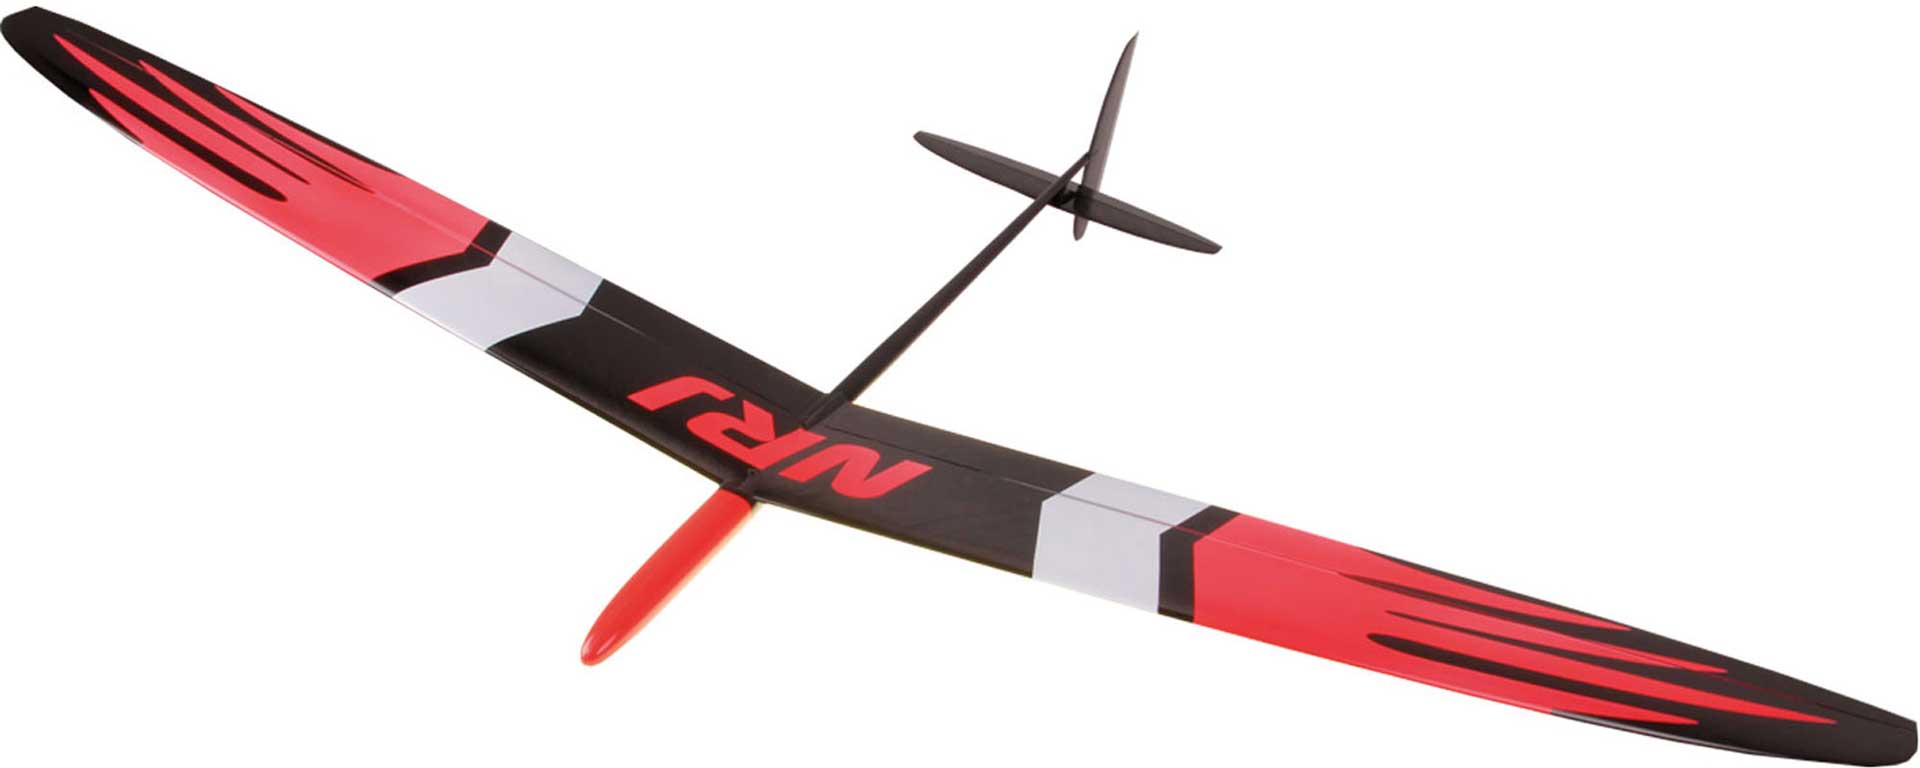 OA-Composites NRJ F3K RED # 2 TEXTREME 60 Discus Launch Glider DLG